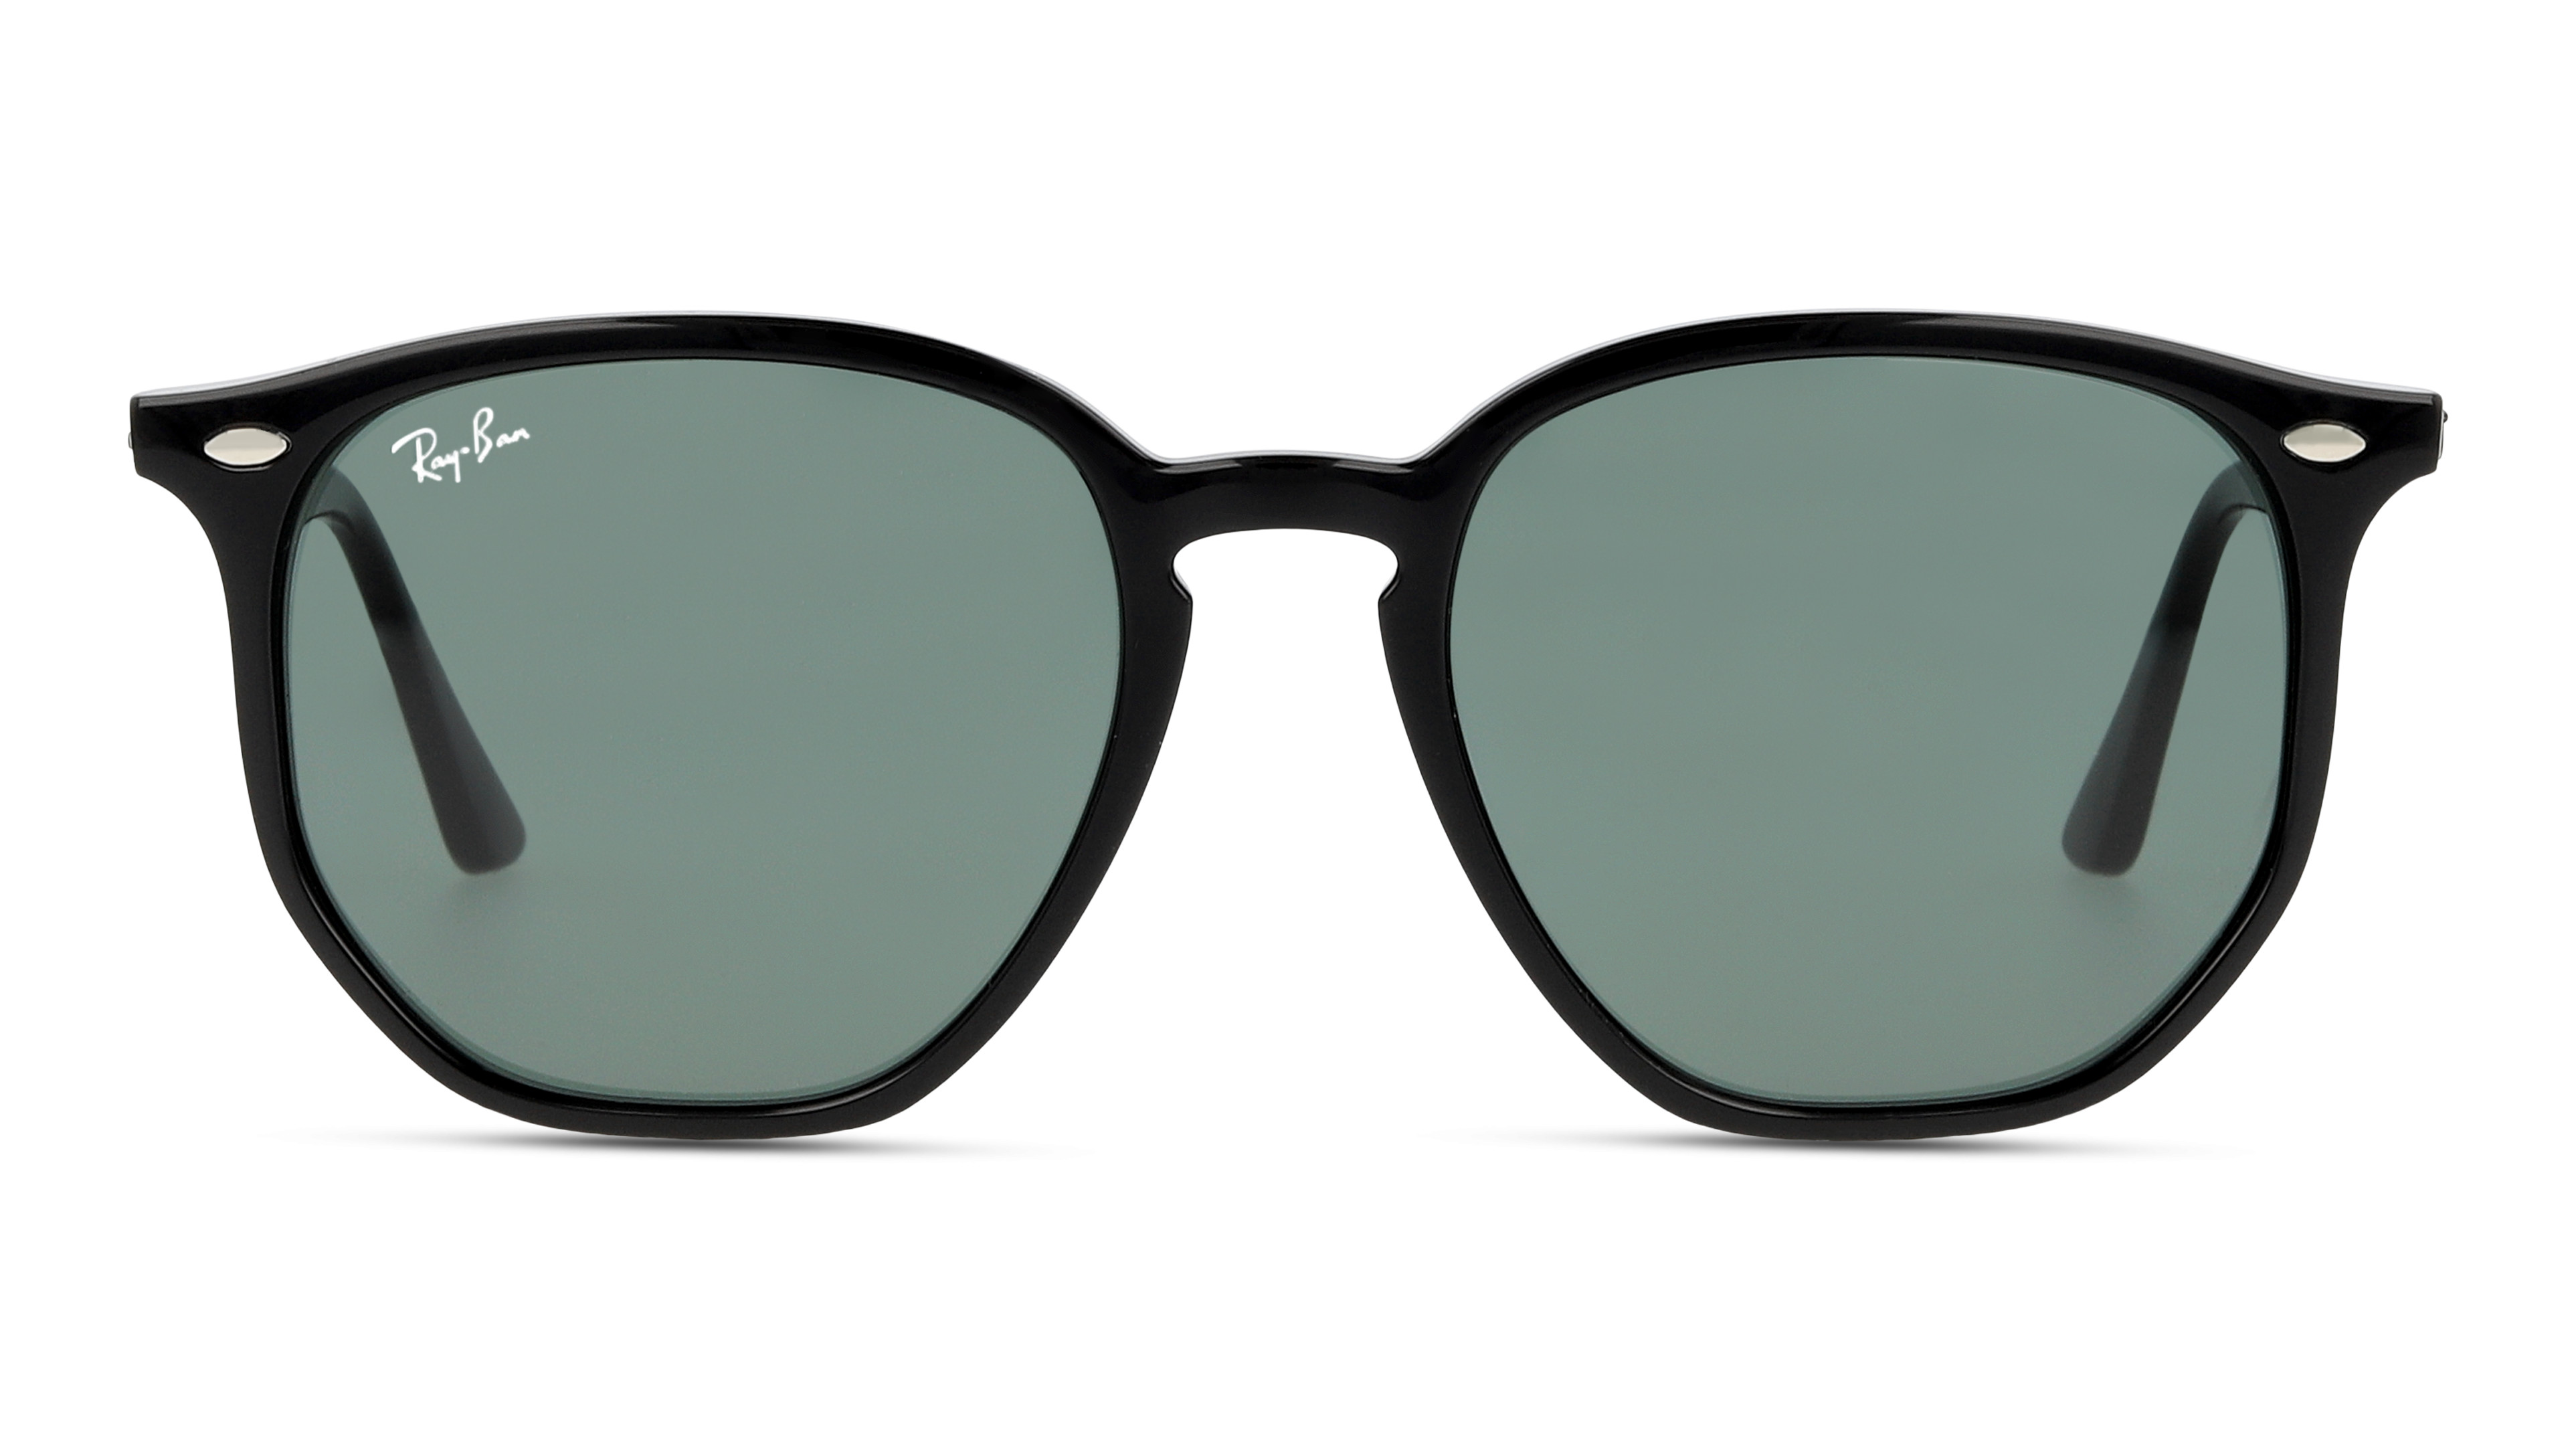 [products.image.front] Ray-Ban 0RB4306 601/71 Sonnenbrille